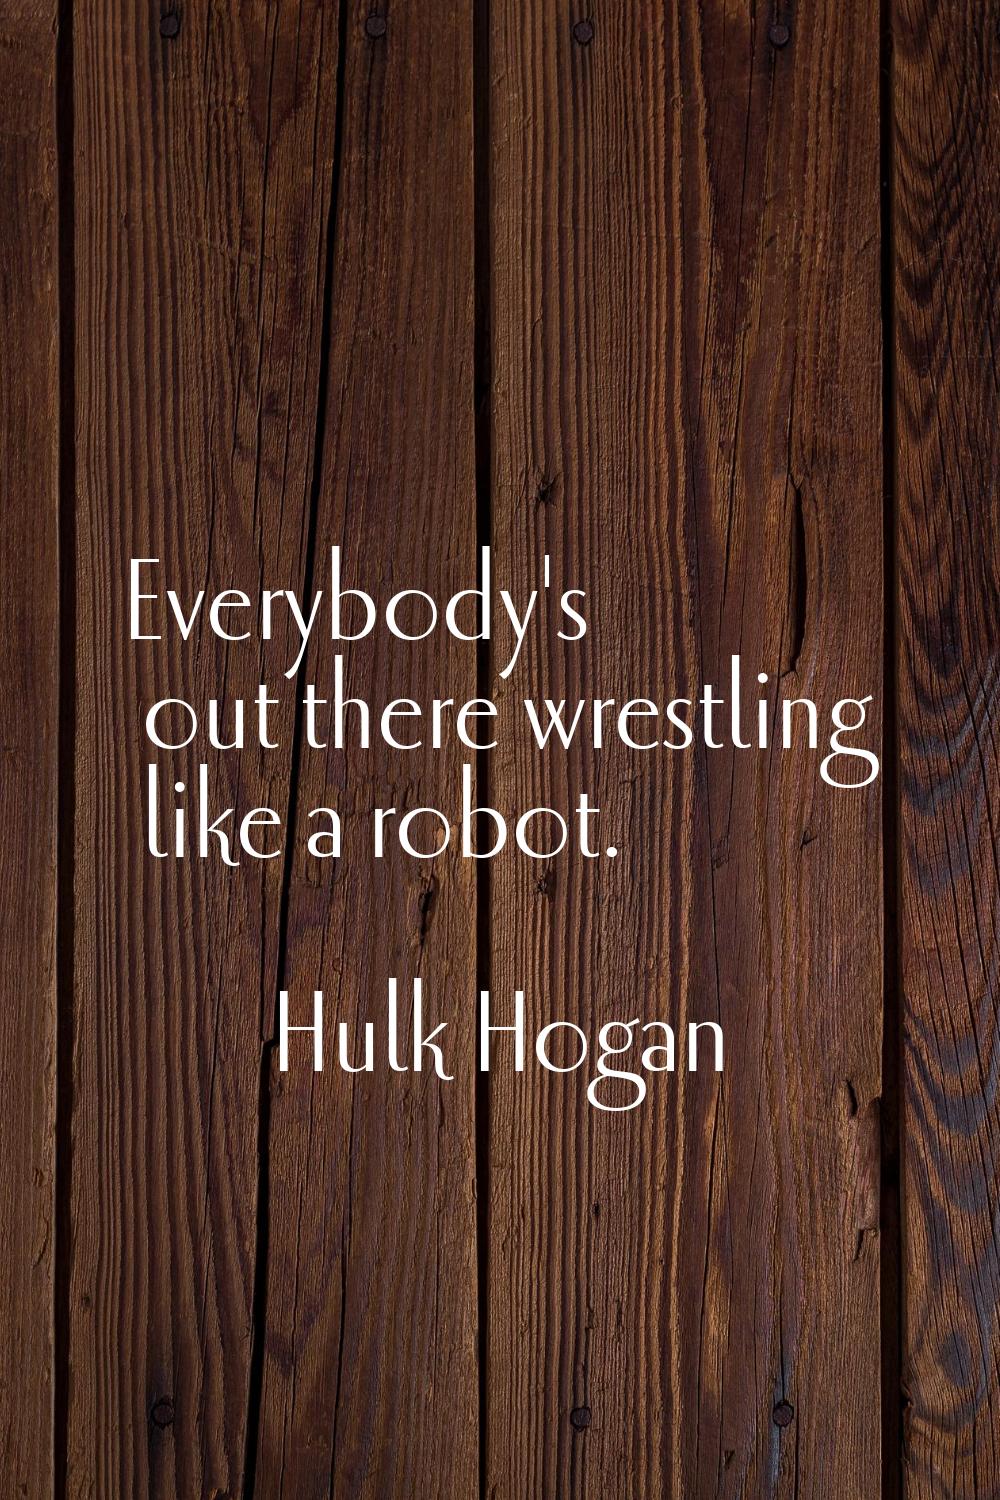 Everybody's out there wrestling like a robot.